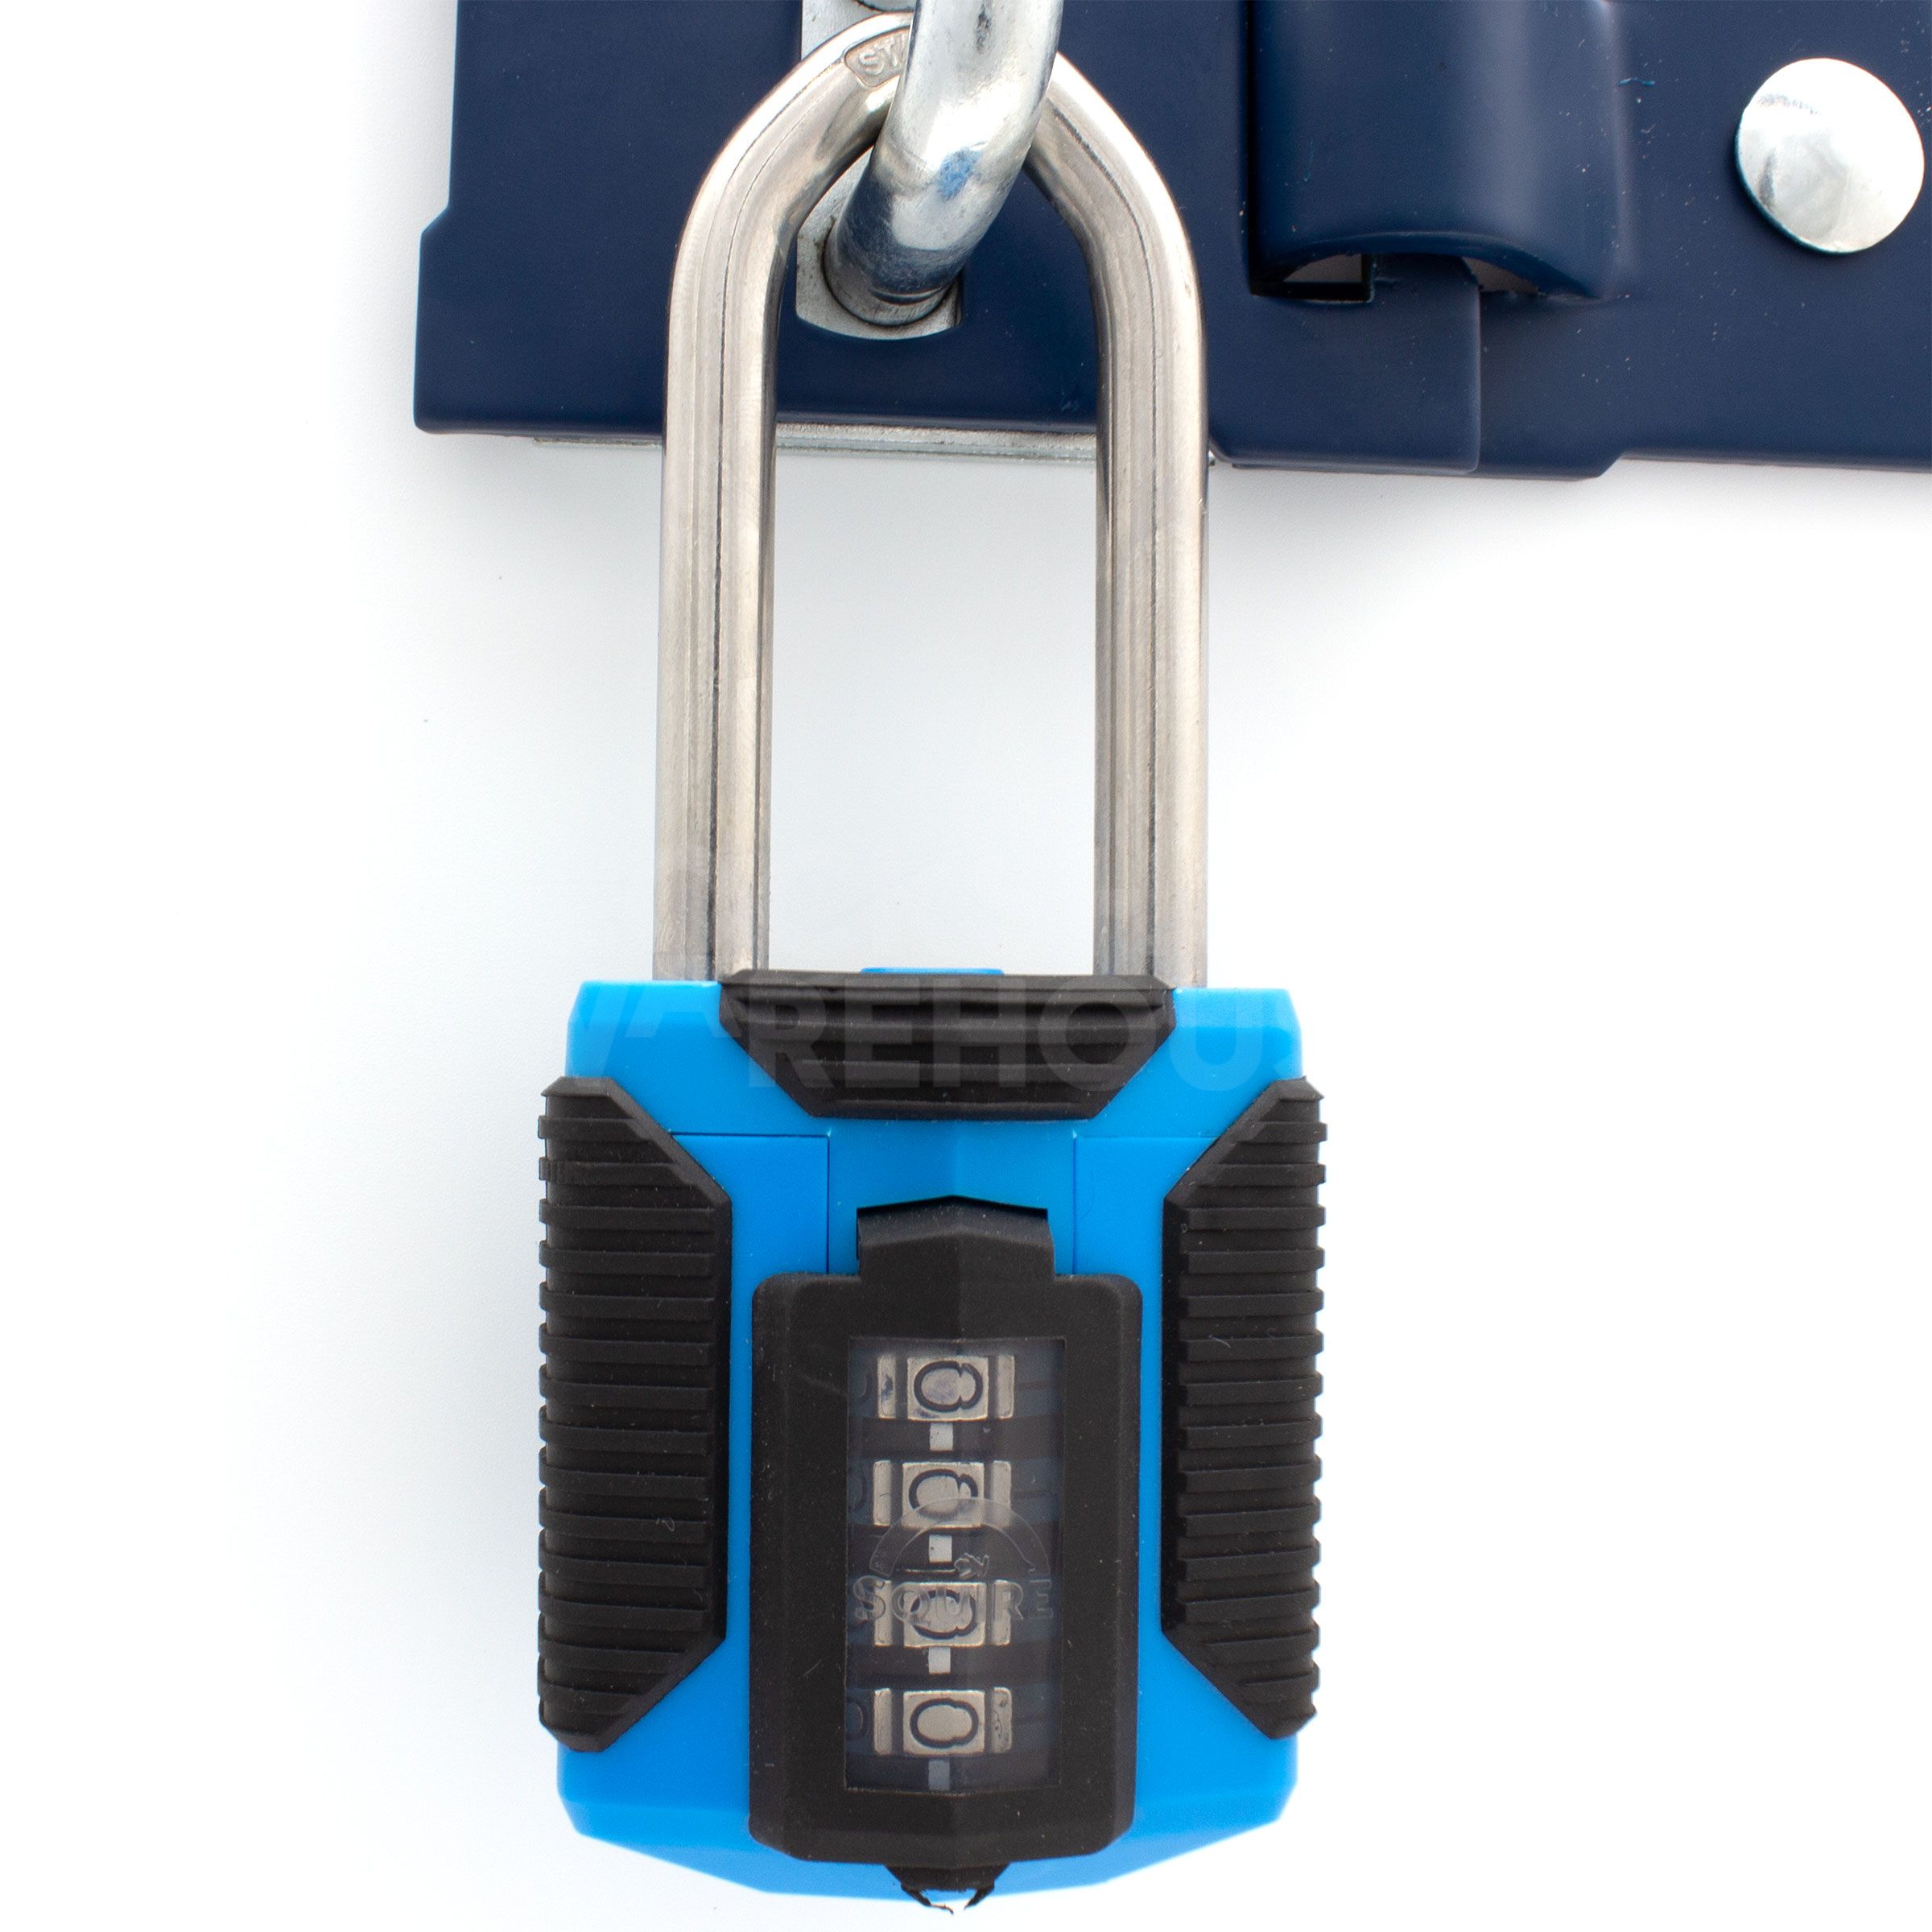 Squire CP50 - ATLS - All Terrain Padlock - Stainless Steel Shackle- 63mm Long Shackle